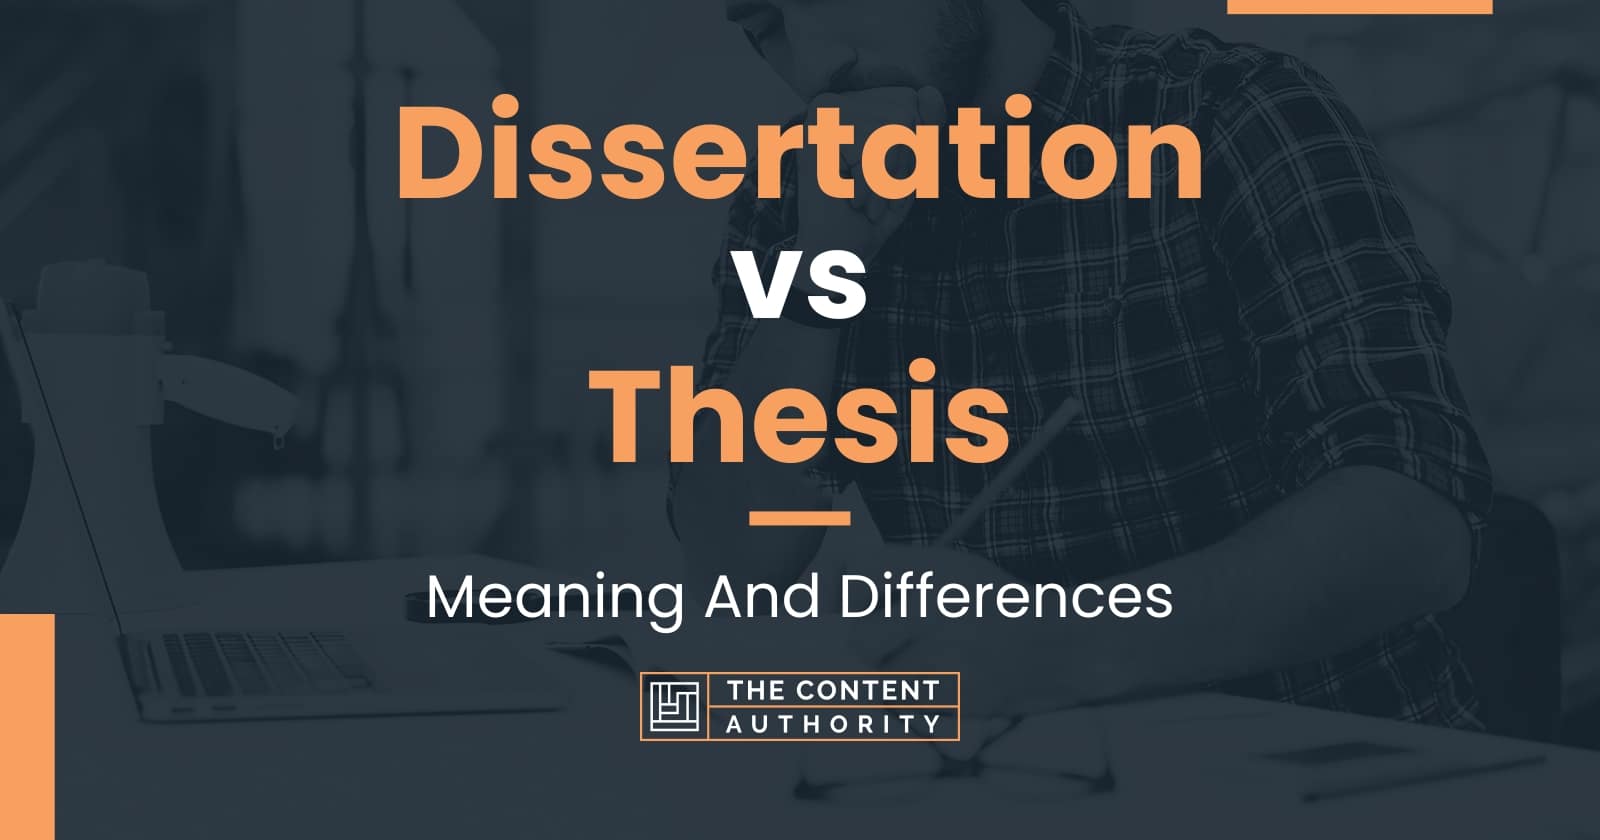 dissertation verb meaning